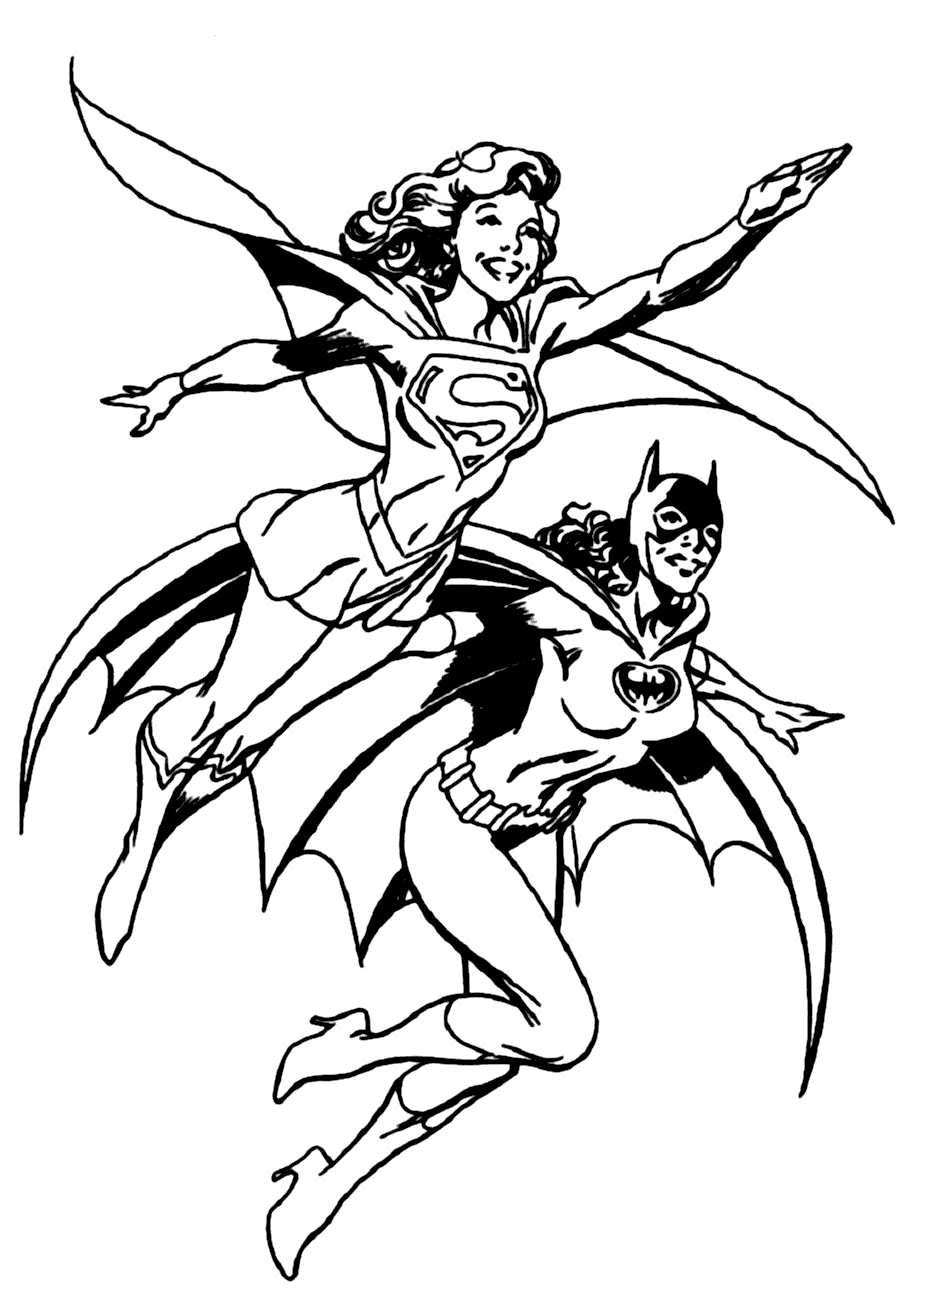 Supergirl And Batgirl Coloring Page